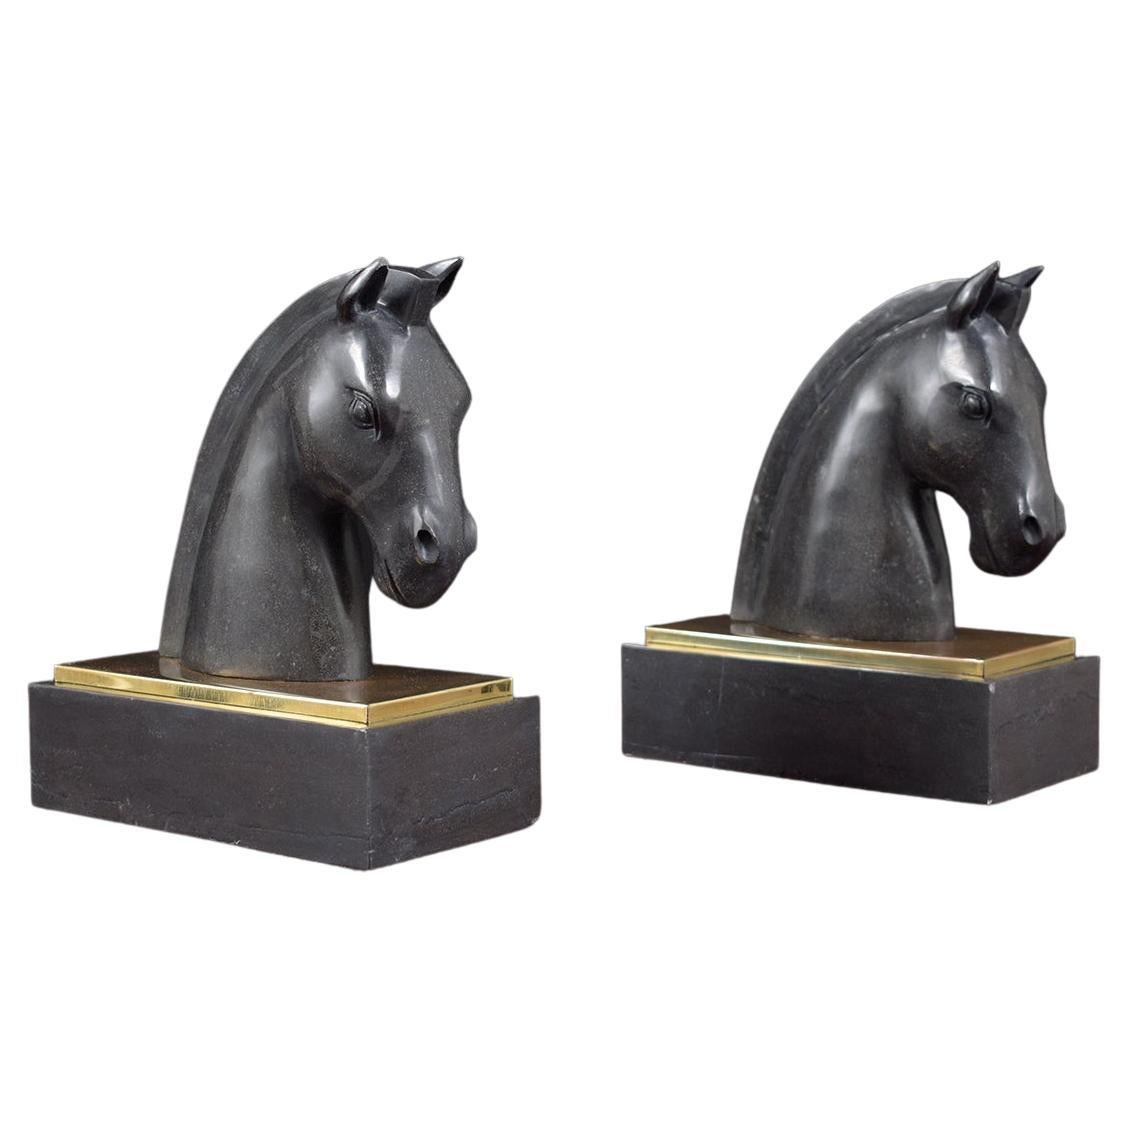 Unique Vintage 1950s Black Marble Horse Head Bookends with Brass Plate